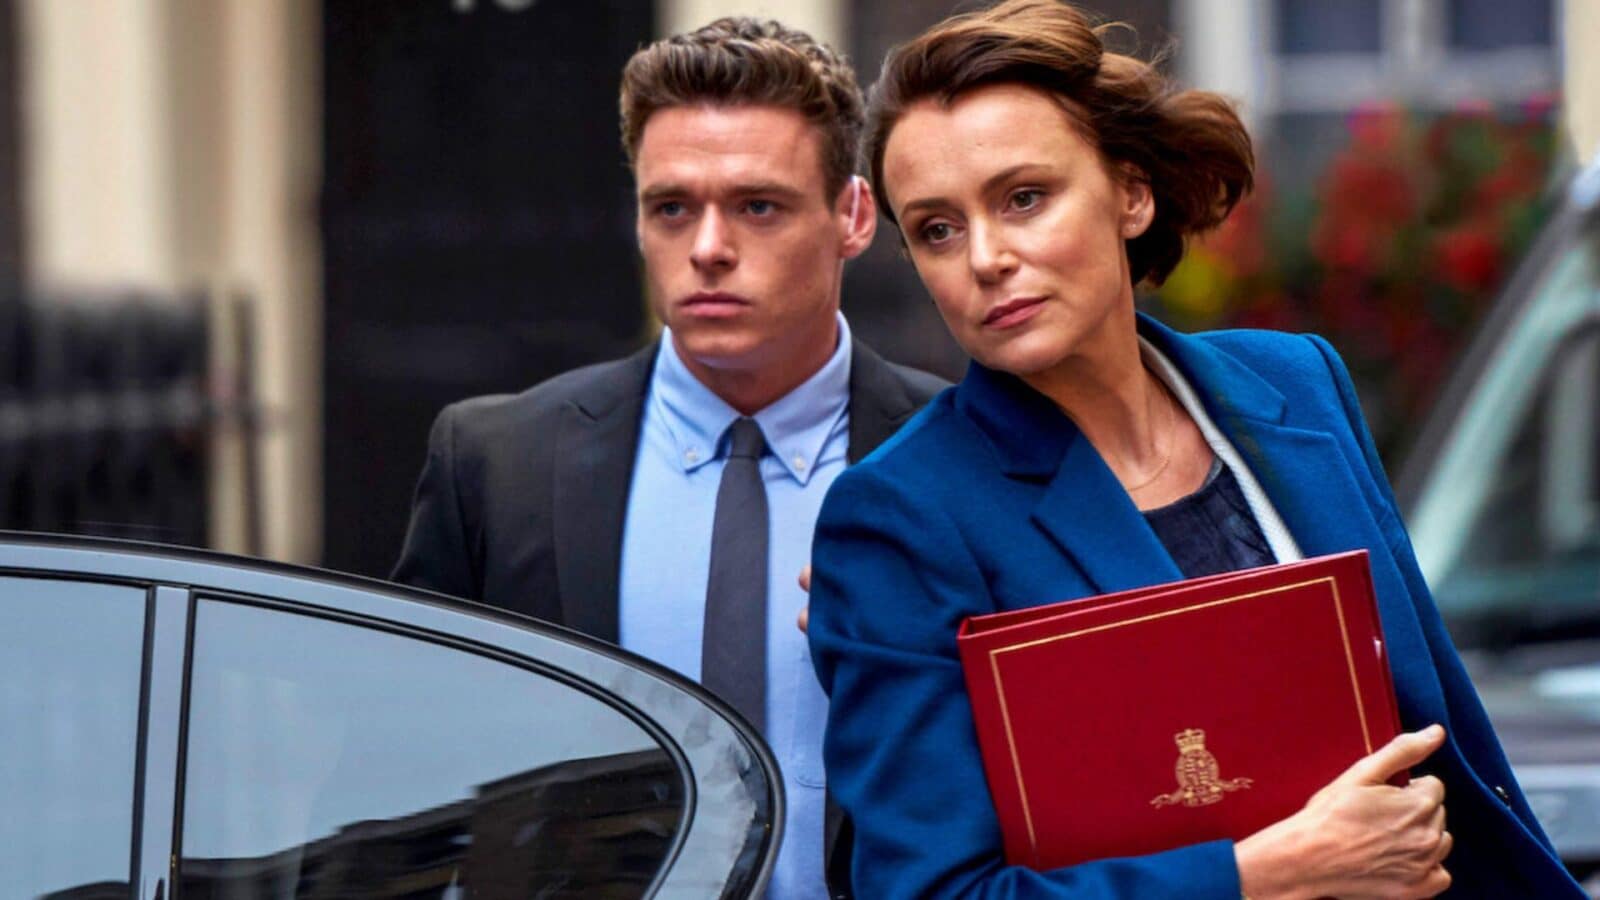 Bodyguard Season 2 Release Dates Announced? Here’s What We Know